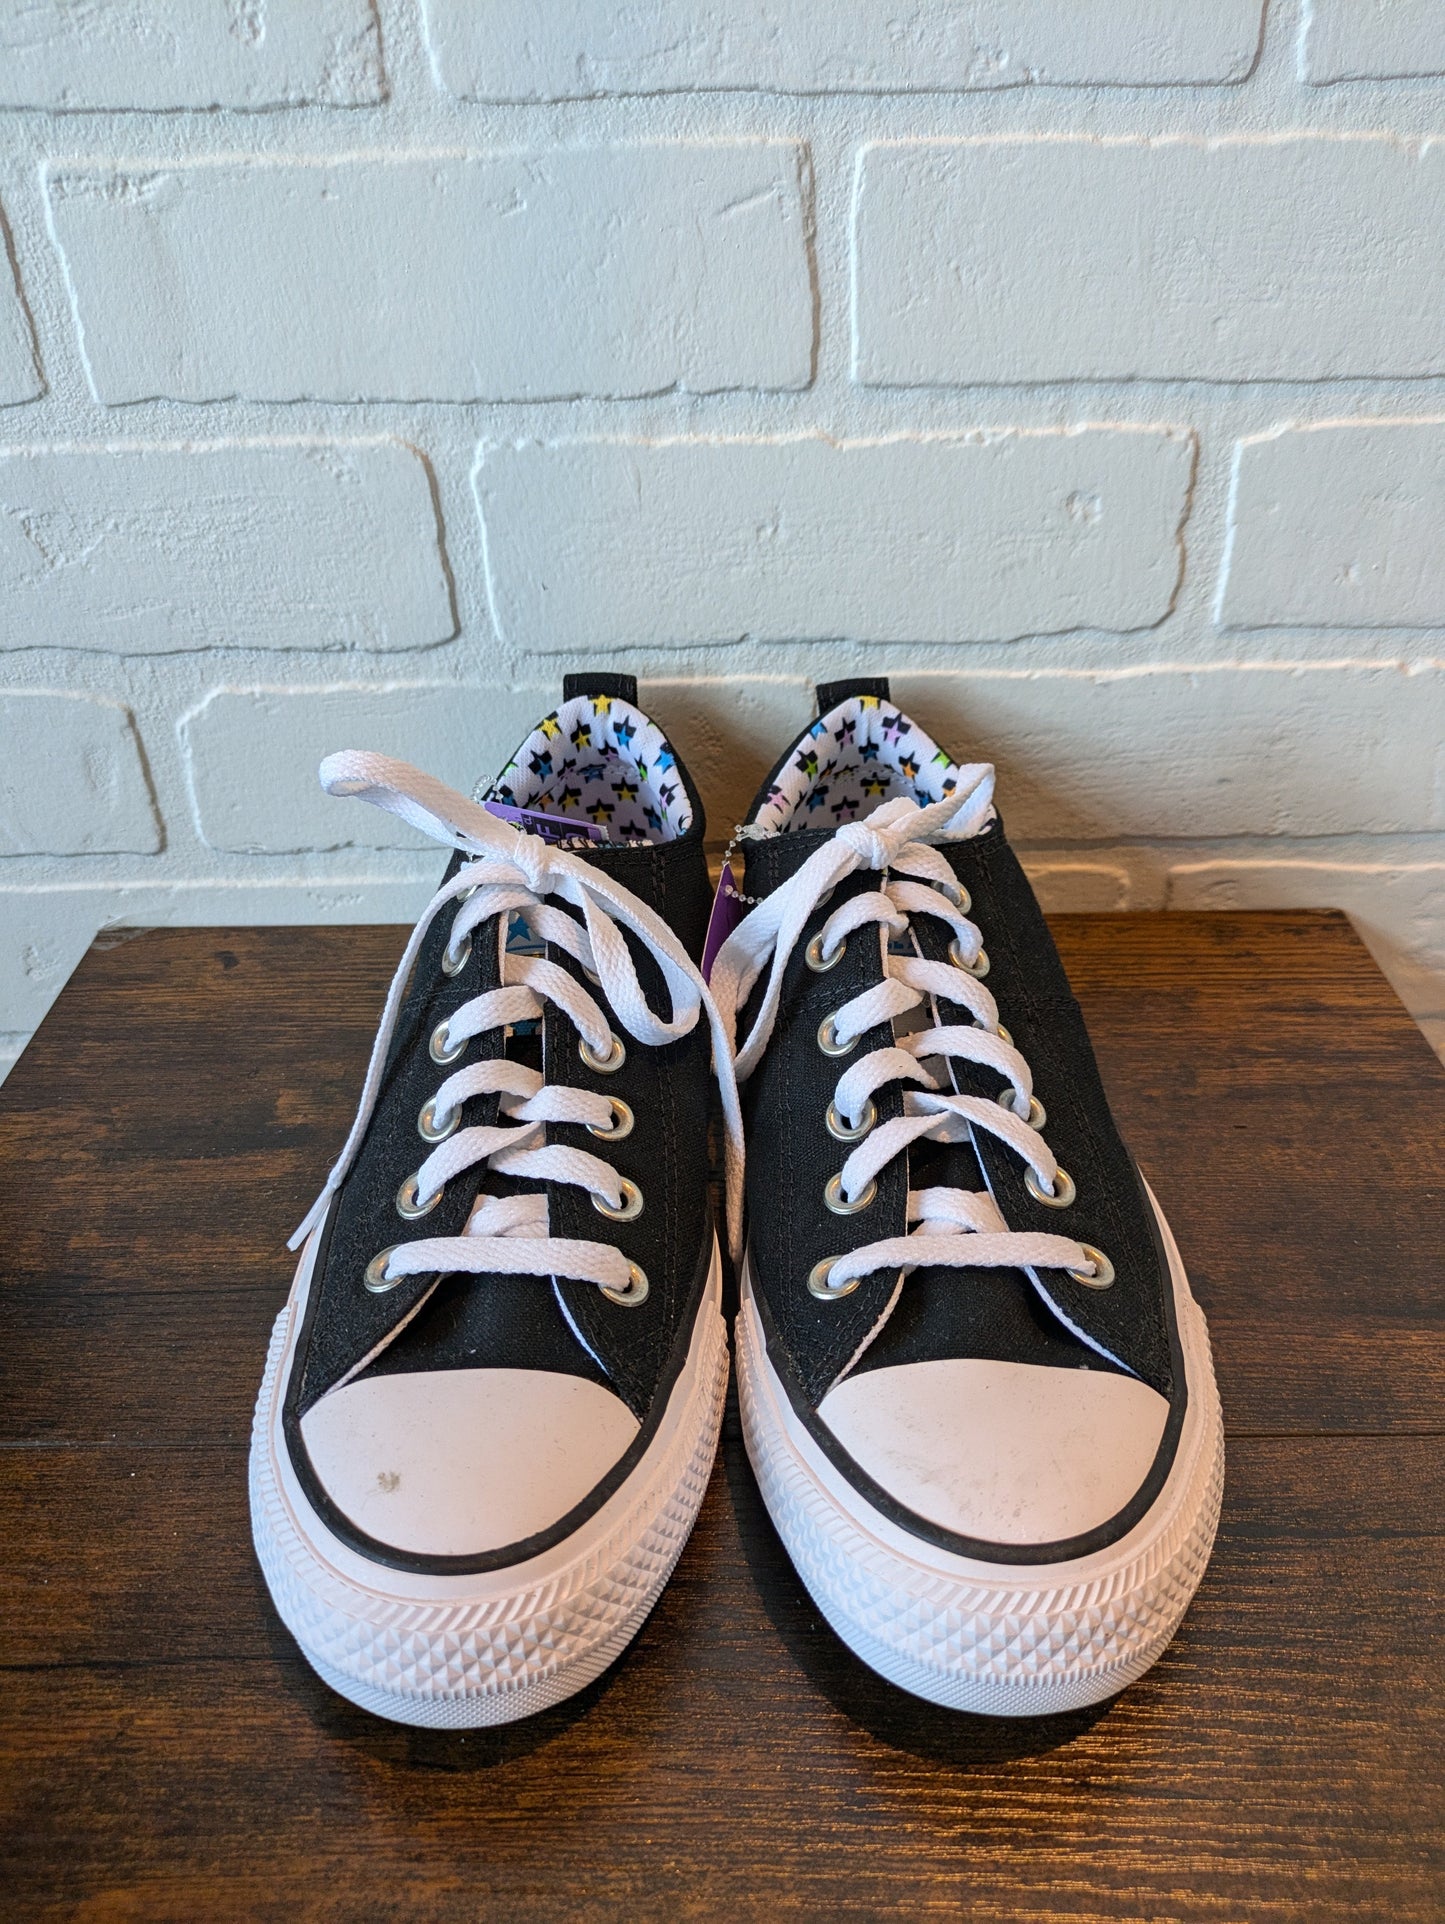 Black & White Shoes Sneakers Converse, Size 8